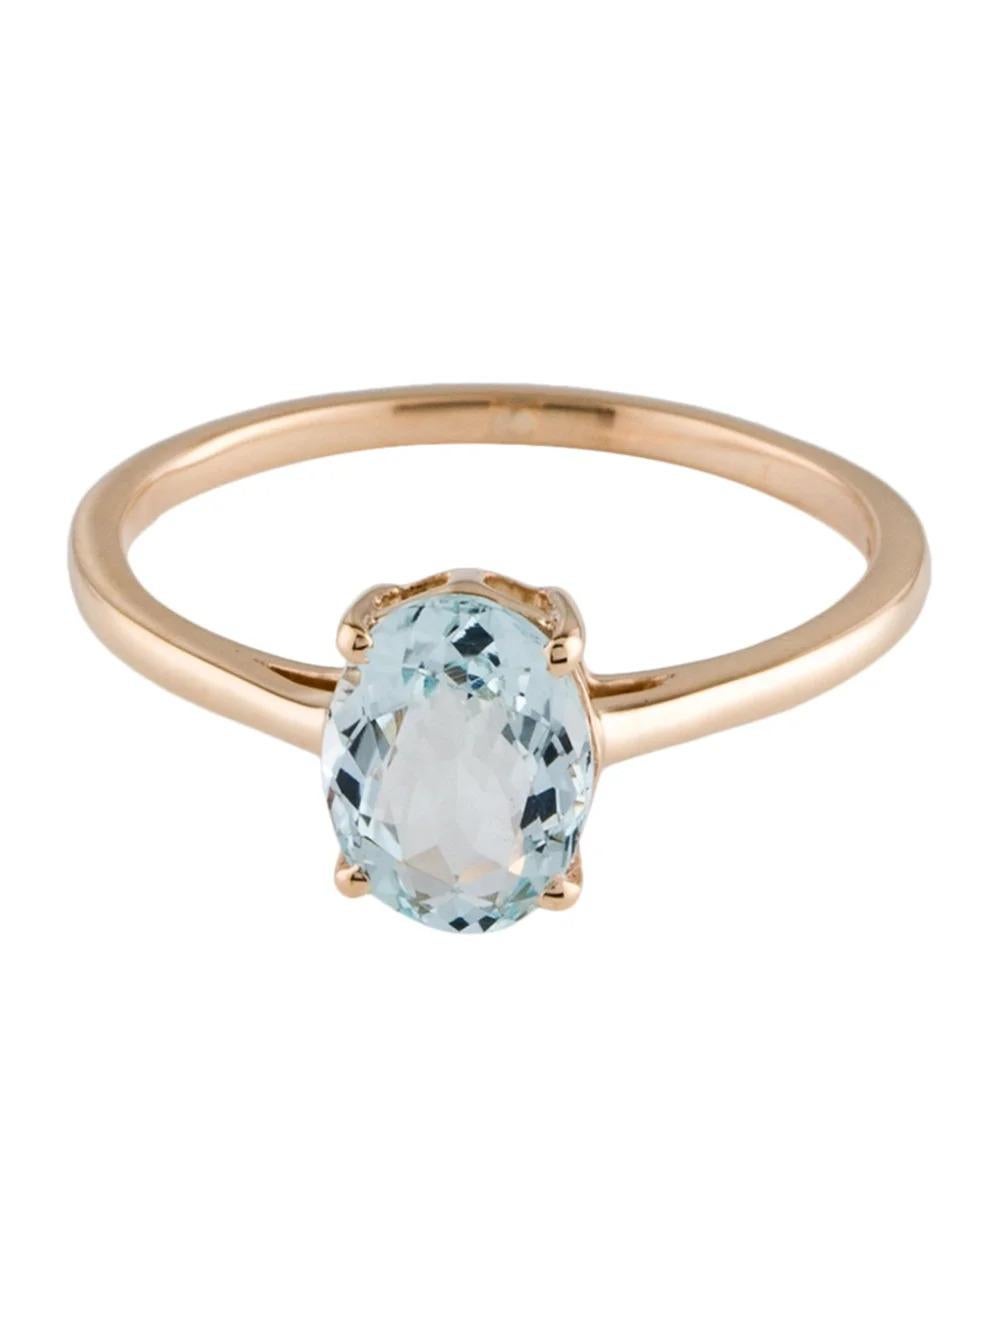 Oval Cut 14K 1.00ct Aquamarine Cocktail Ring Size 6.75 - Blue Gemstone, Statement Jewelry For Sale